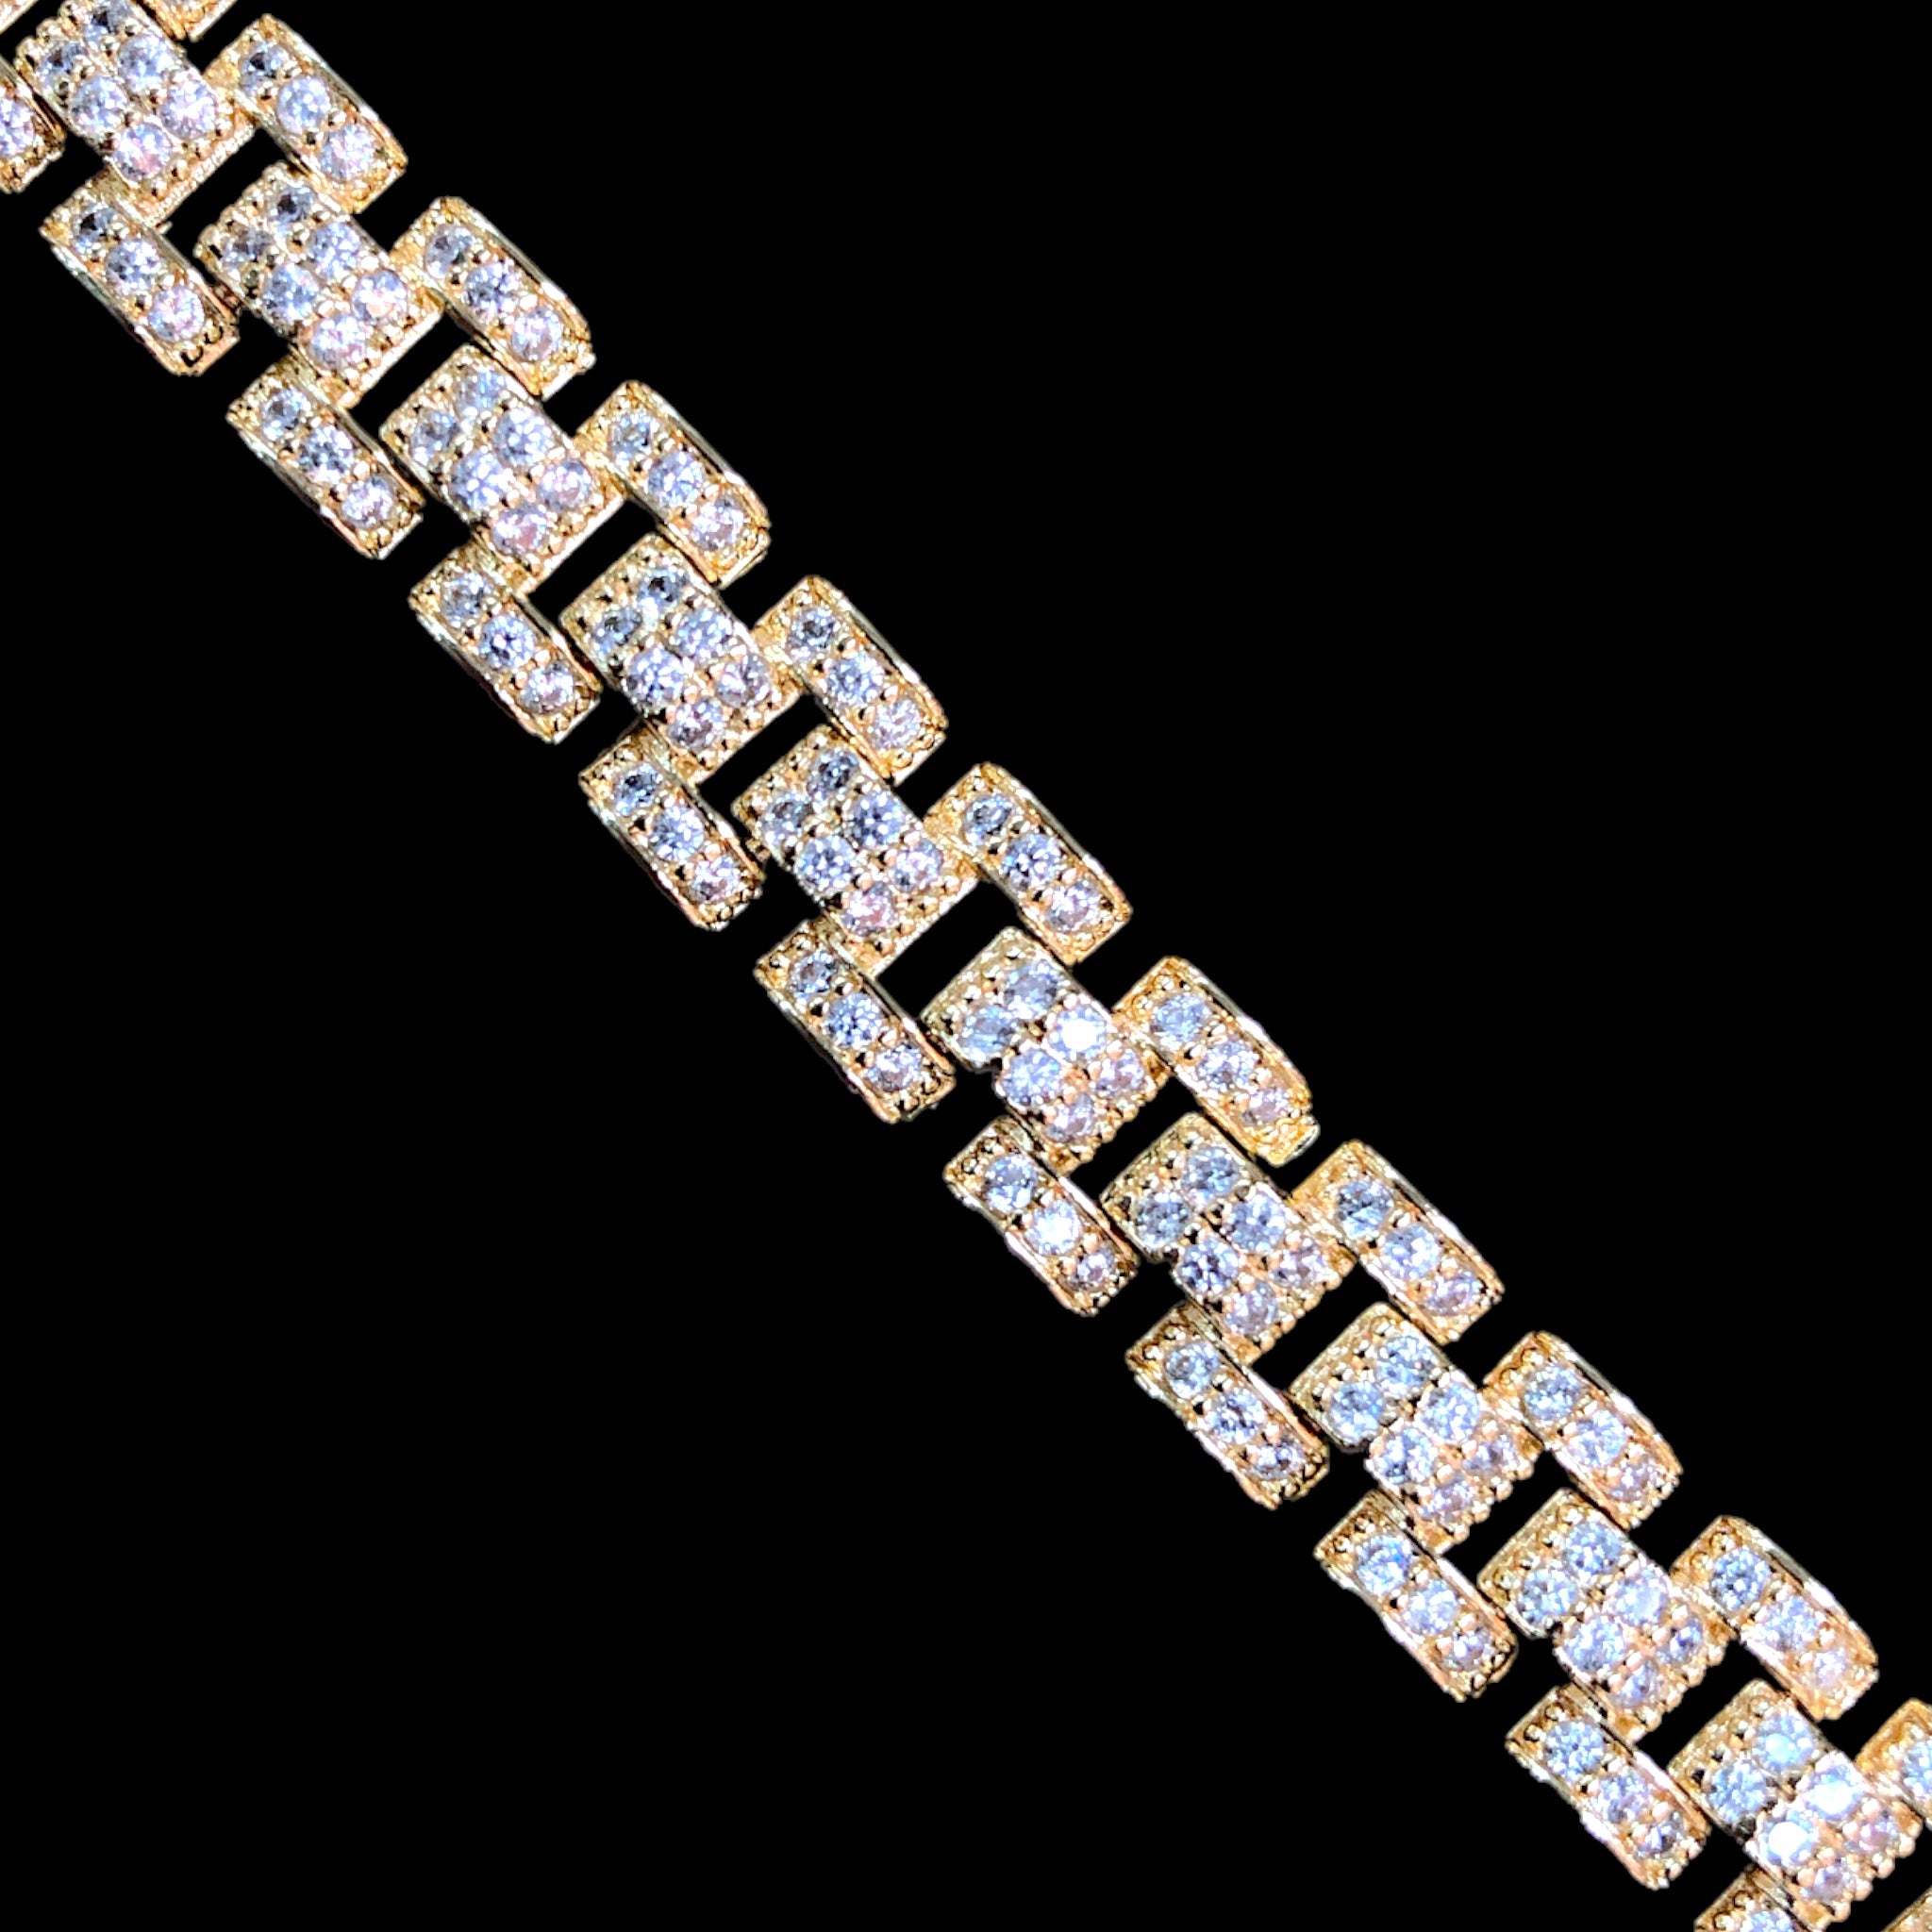 18k Gold Filled Iced Out Rolex Style CZ Bracelet- kuania oro laminado